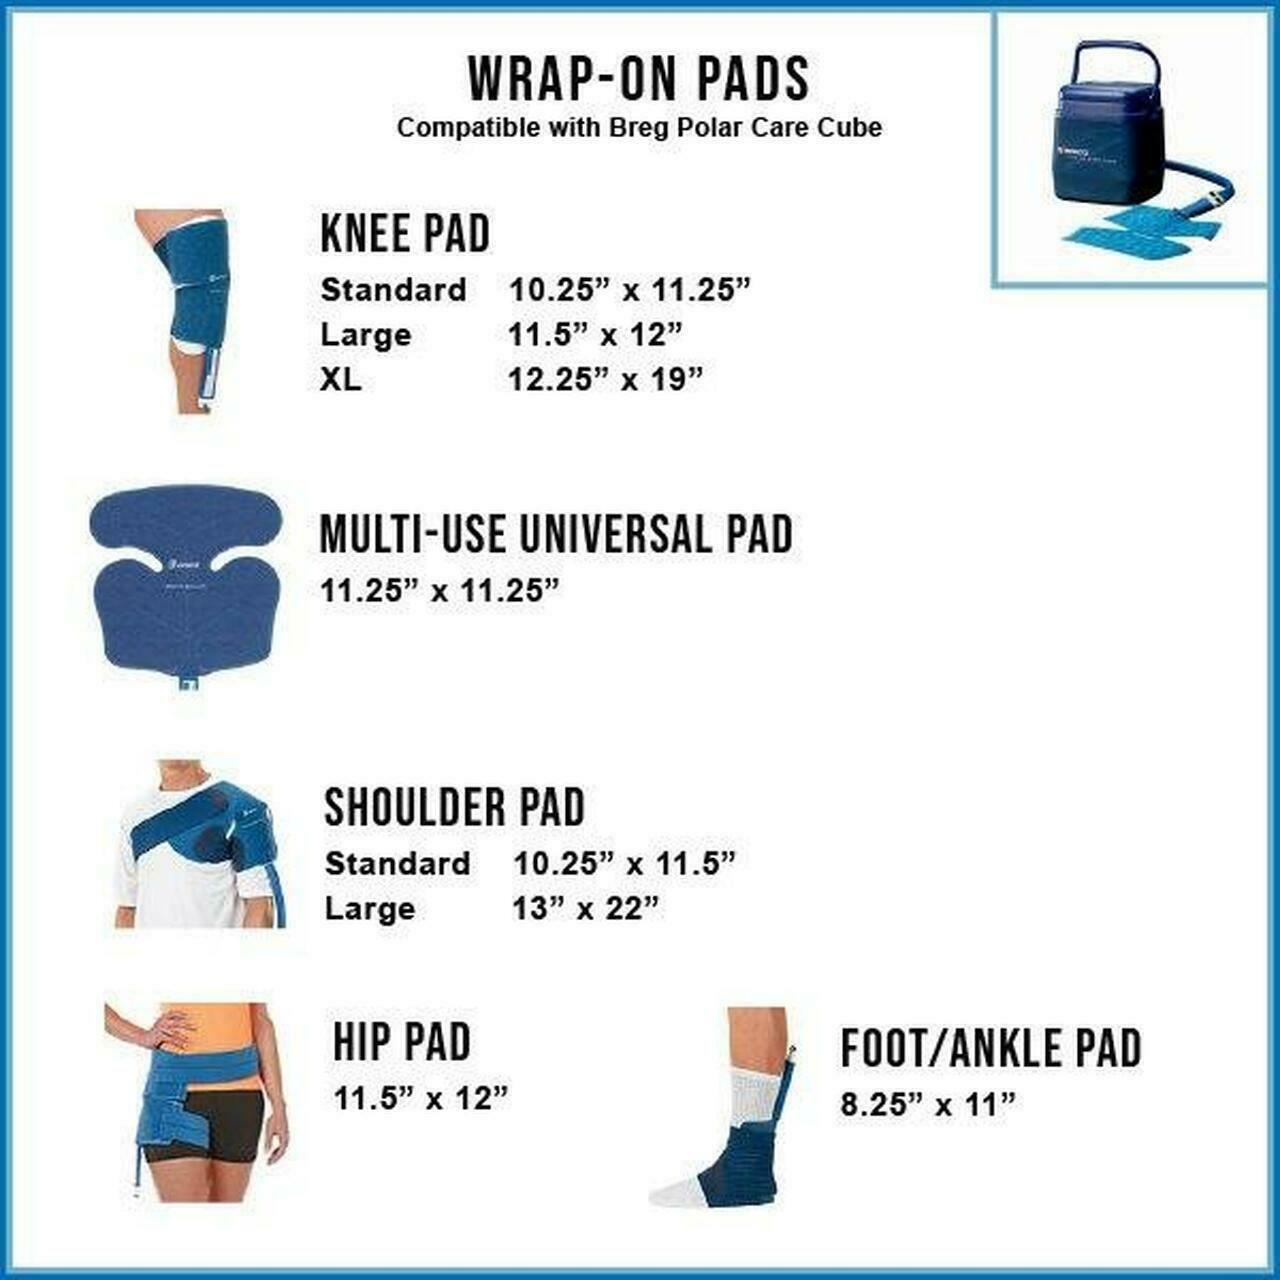 breg-polar-care-wrap-on-hip-pad-sourcecoldtherapy-2 - SourceColdTherapy